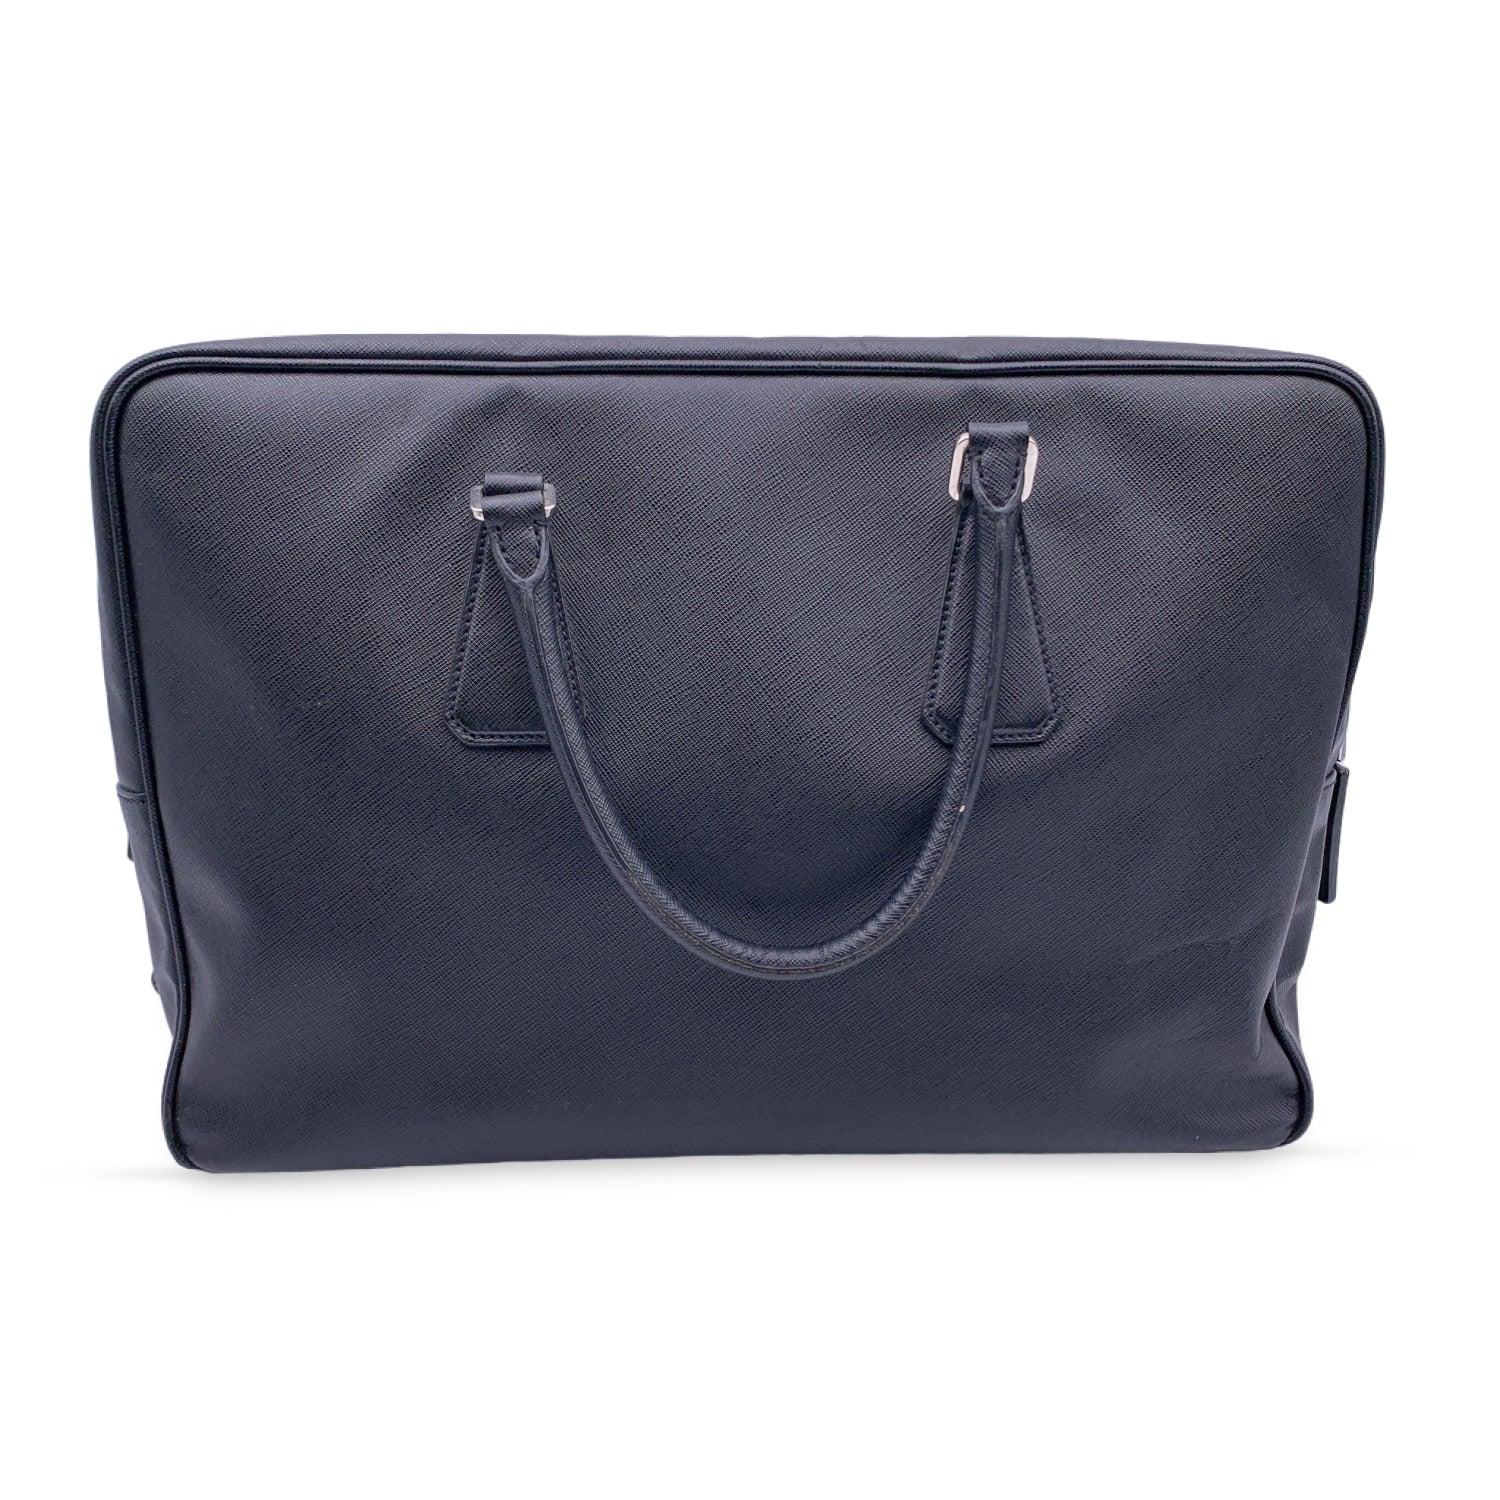 Prada Black Saffiano Leather Briefcase Satchel Zip Top Work Bag In Good Condition For Sale In Rome, Rome